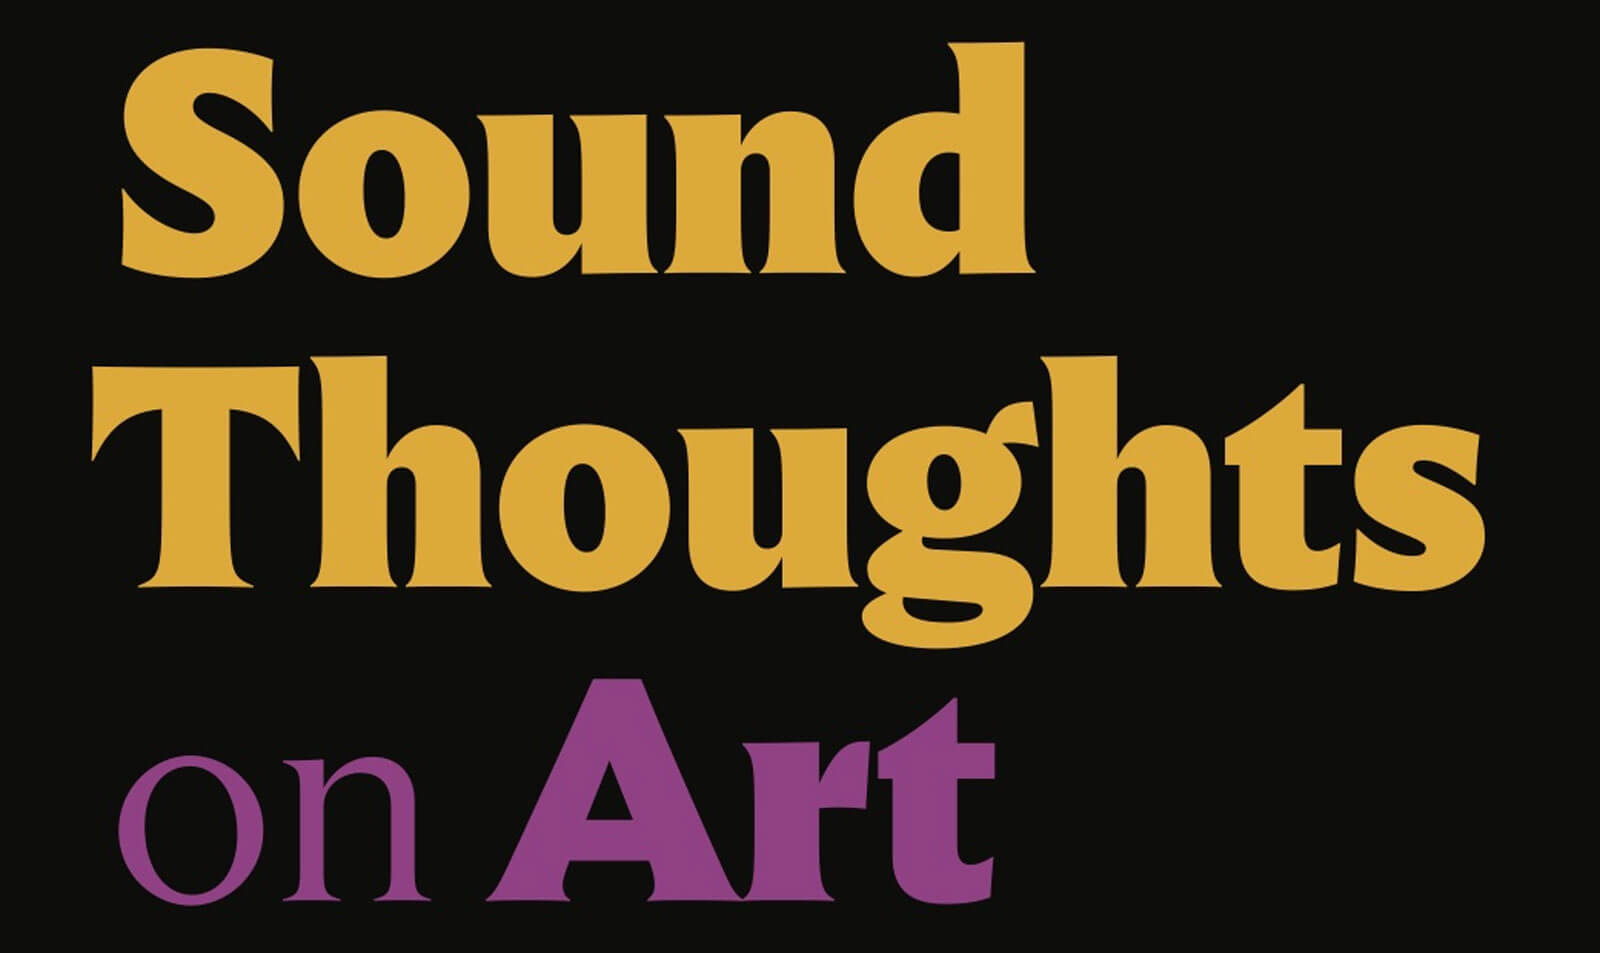 Sound Thoughts on Art